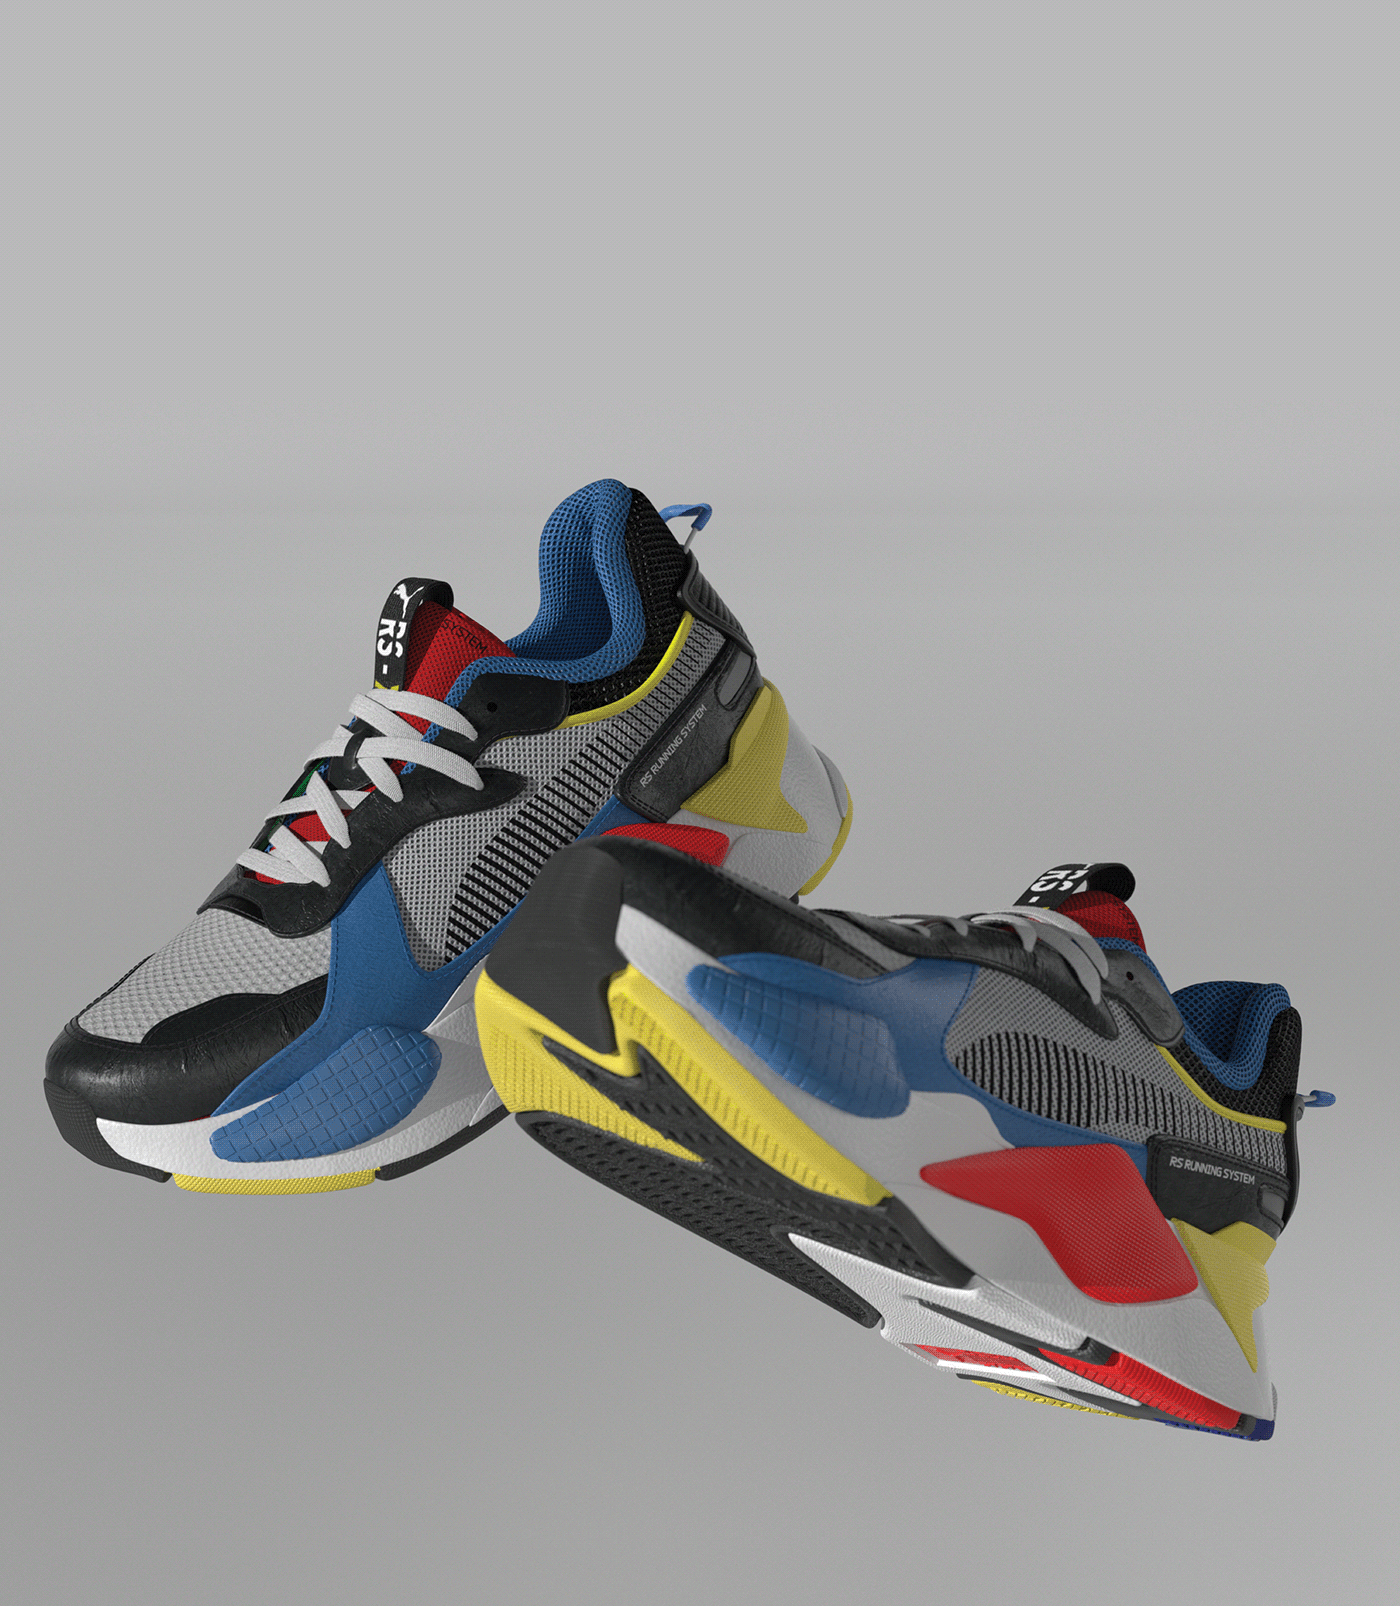 3d modeling 3D Rendering 3D shoes CGI footwear photorealistic product product design  shoe sneakers